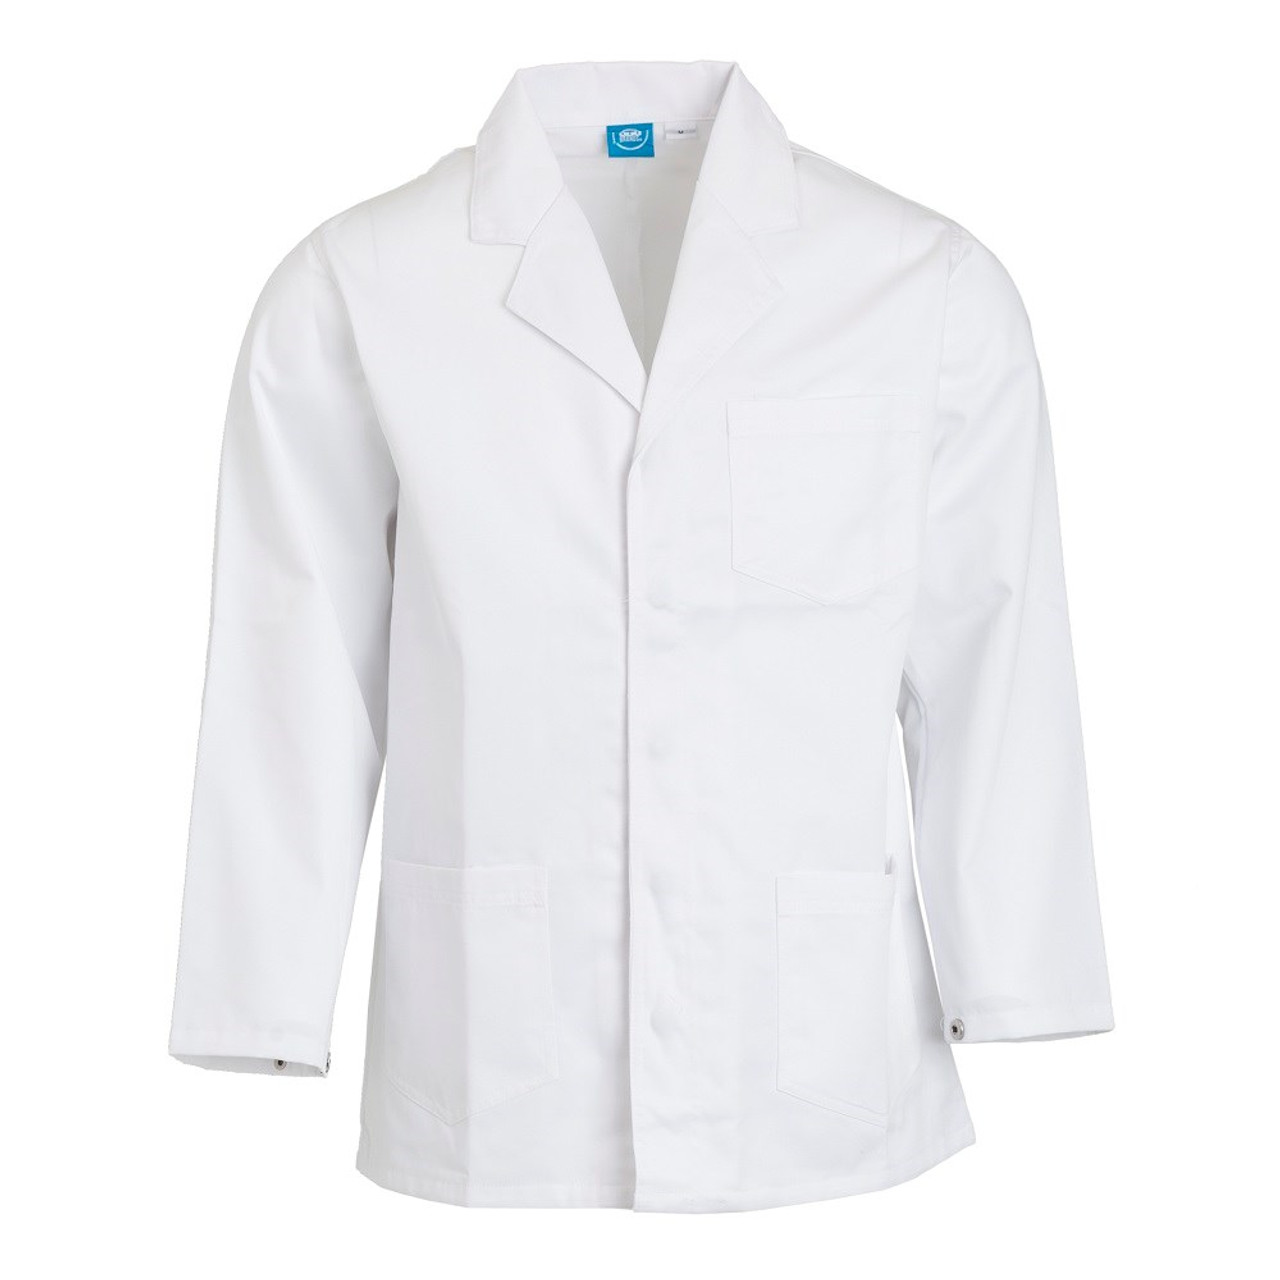 Source Medical Clothing 100% Cotton Or Polyester Cotton Lab, 49% OFF